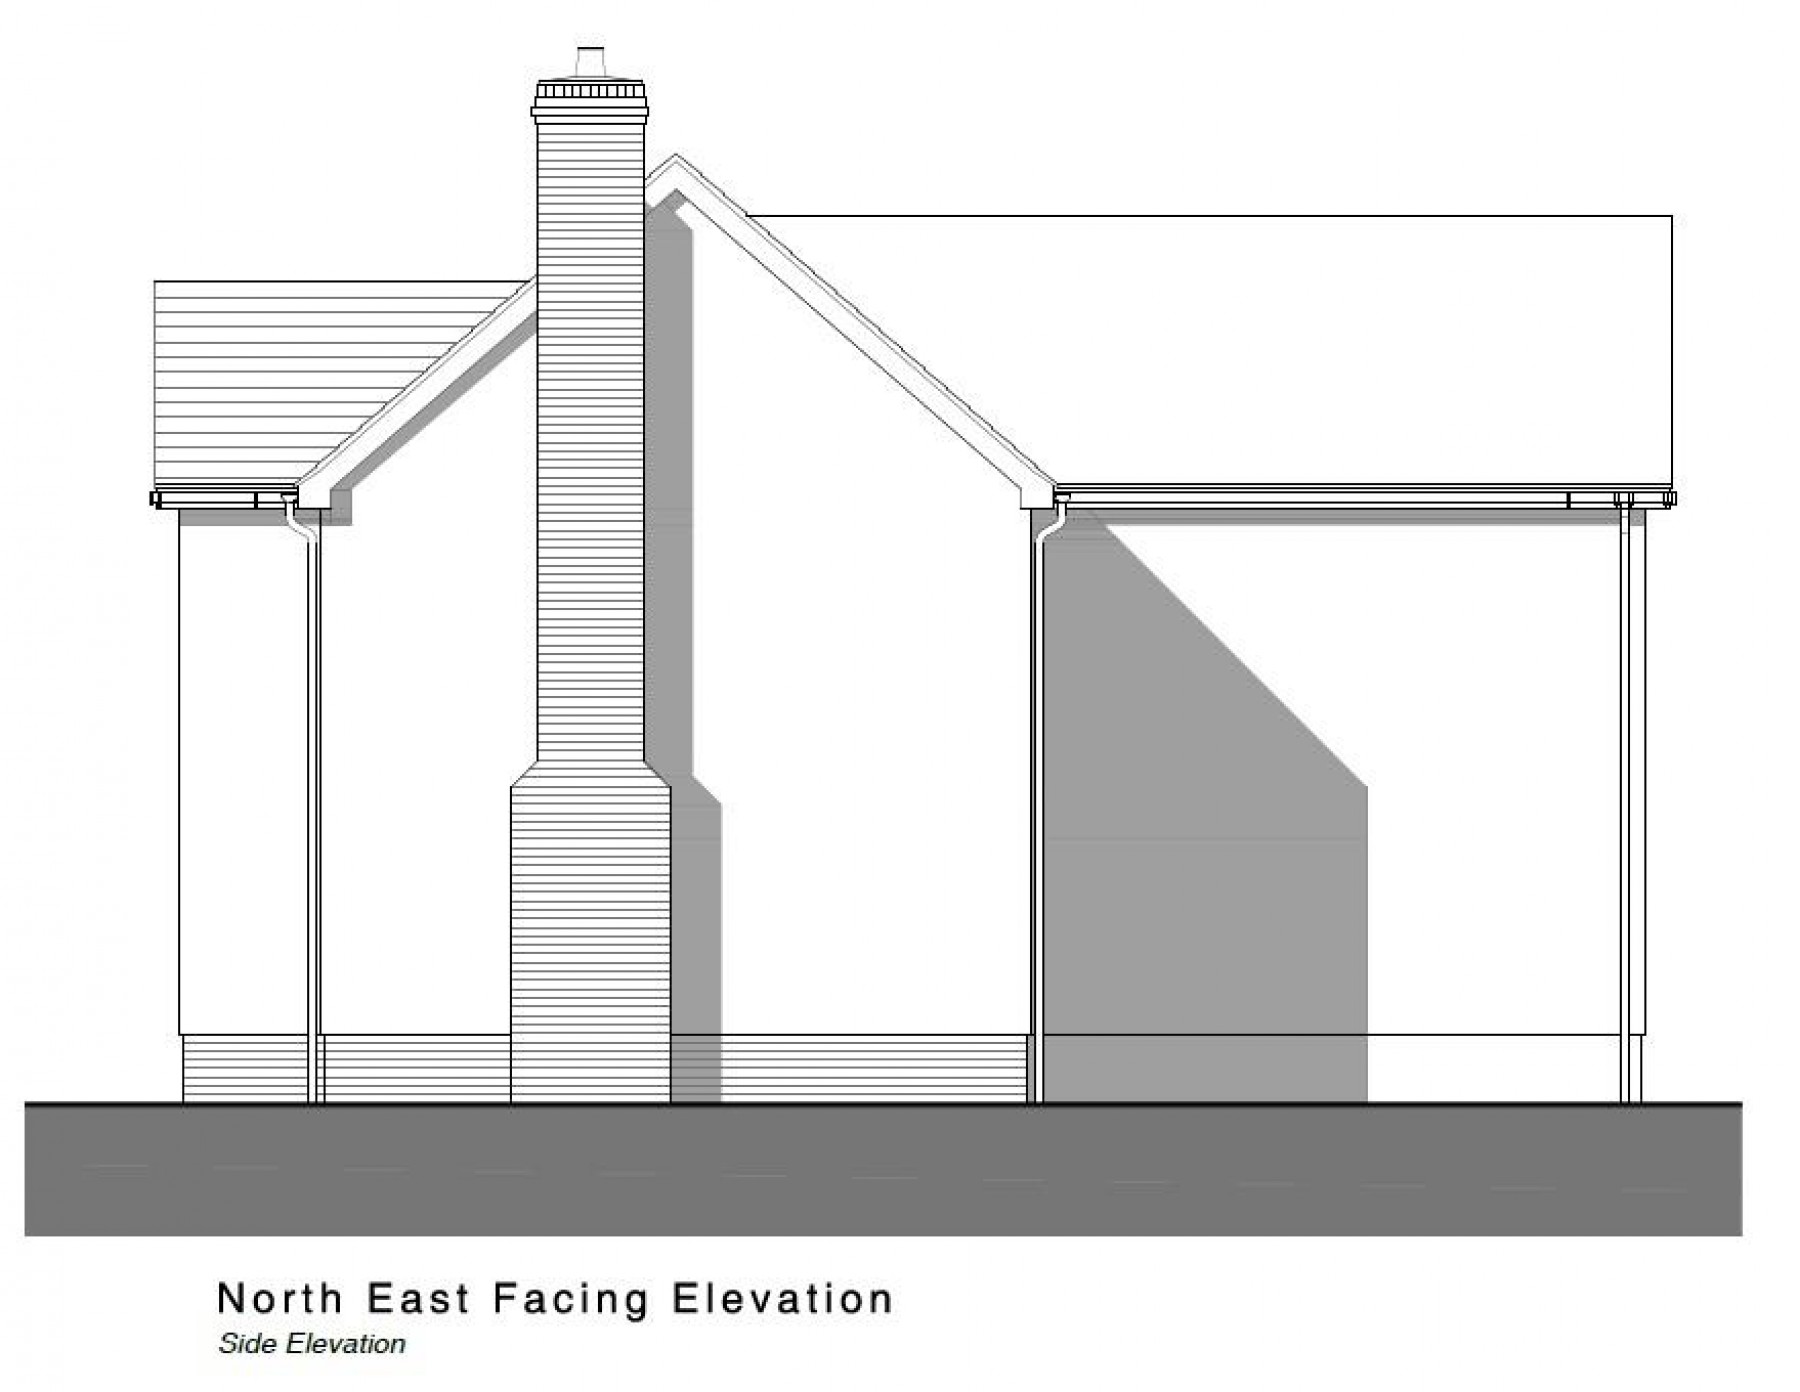 Images for PLANNING GRANTED - 4 BED DETACHED HOUSE